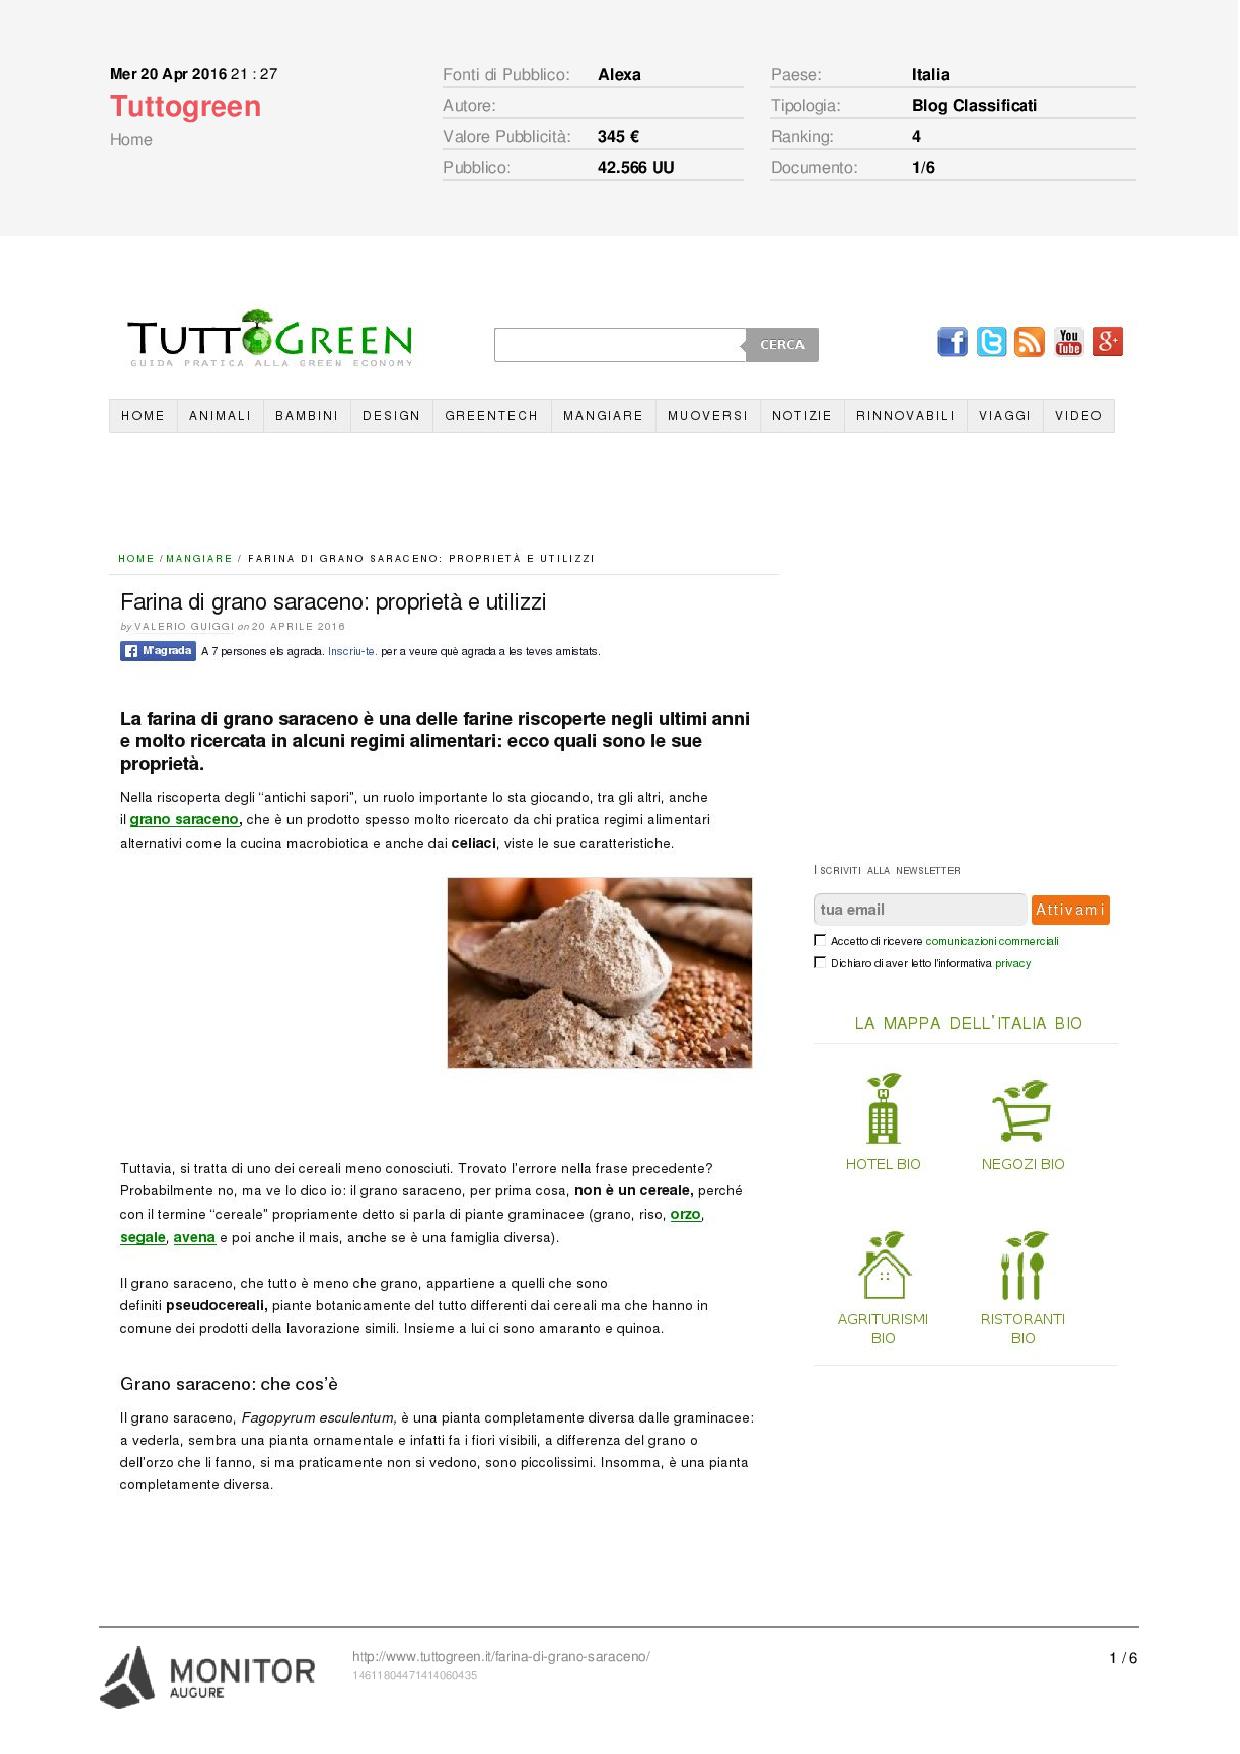 20.04.16_tuttogreen.it-page-001